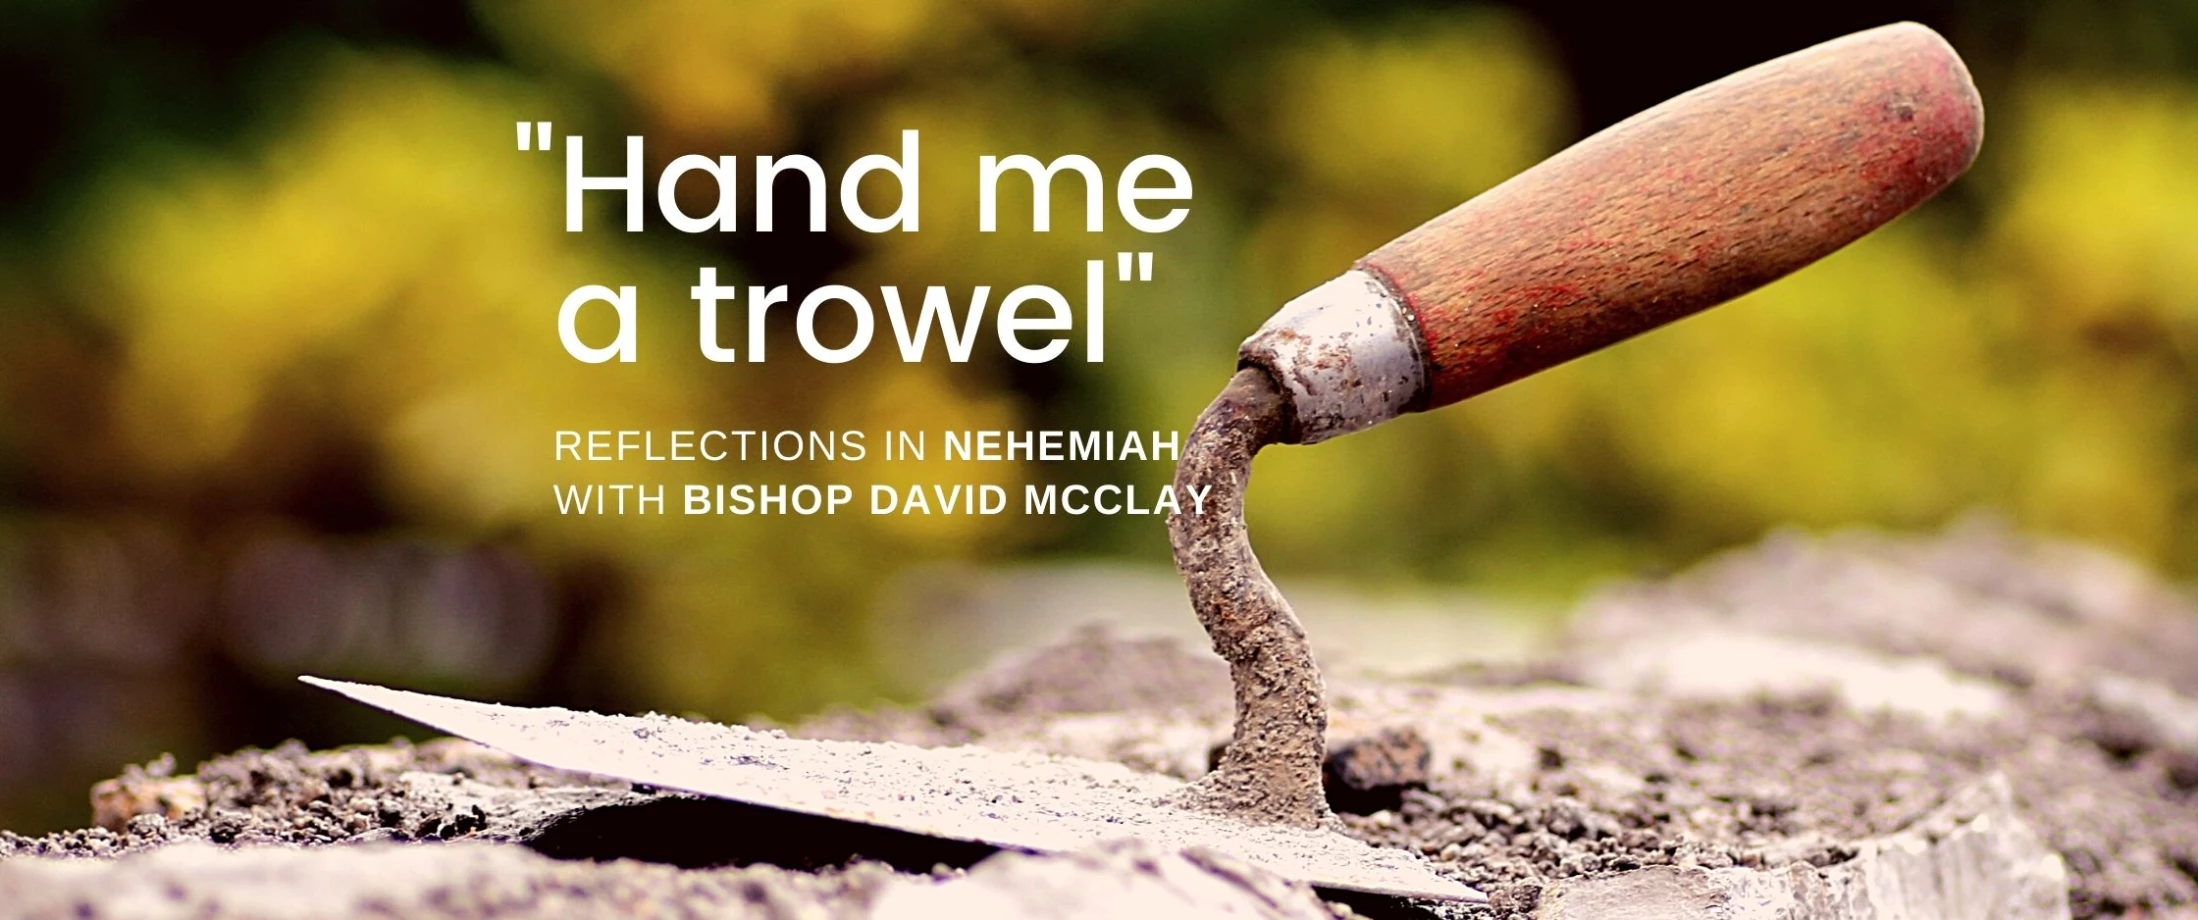 Reflections in Nehemiah for Lent Day 19